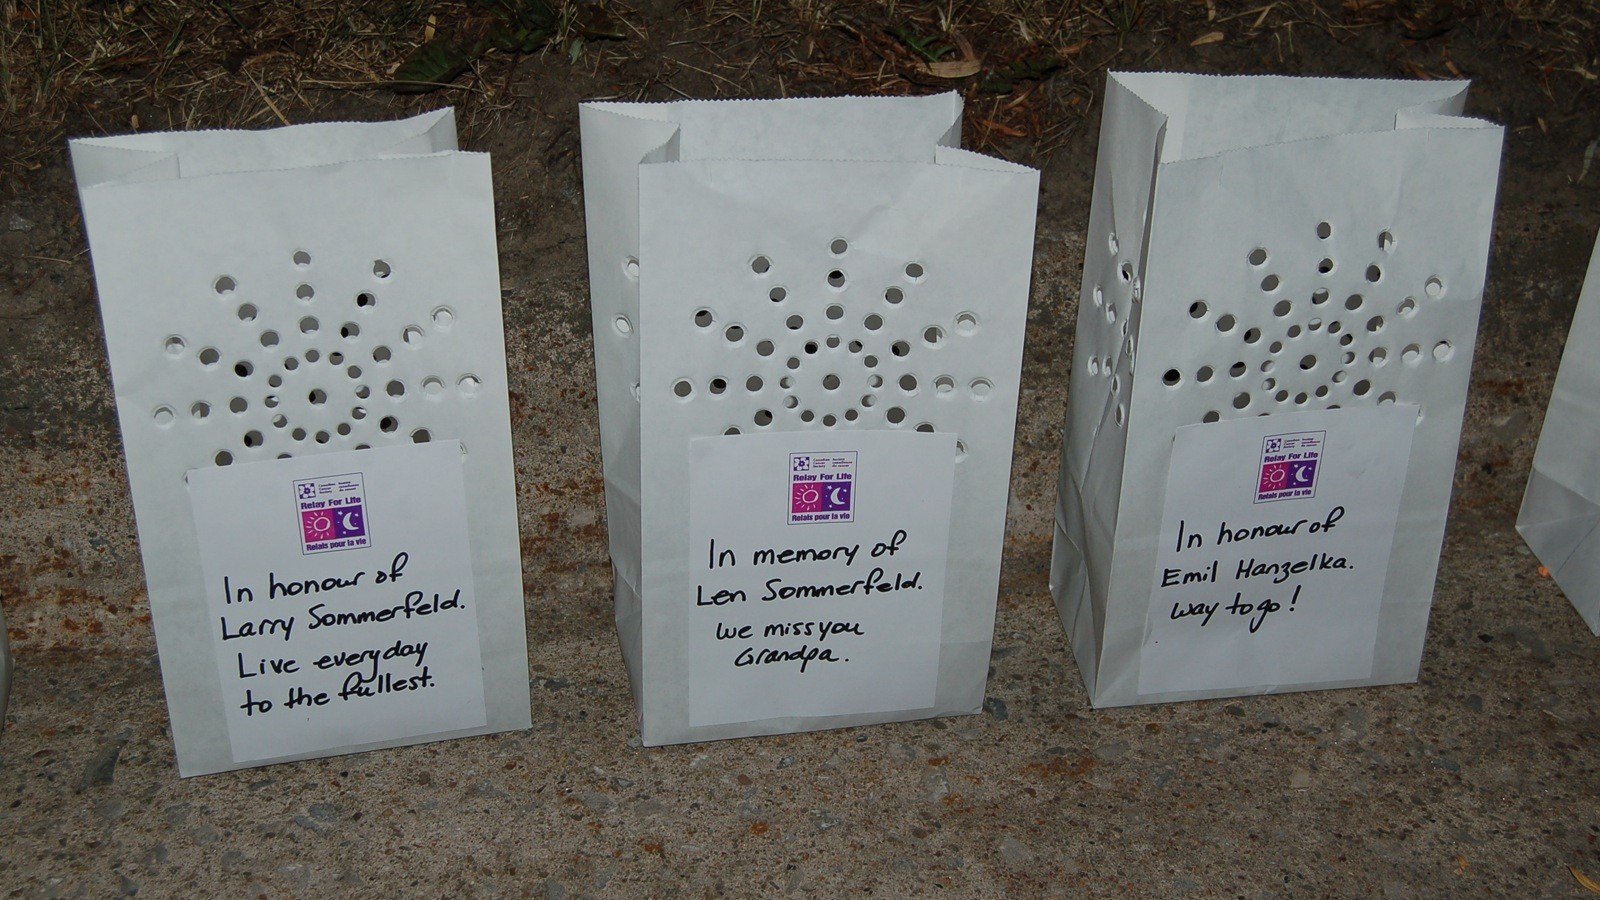 Relay for Life hosts art exhibit of luminarias  North Star Reporter